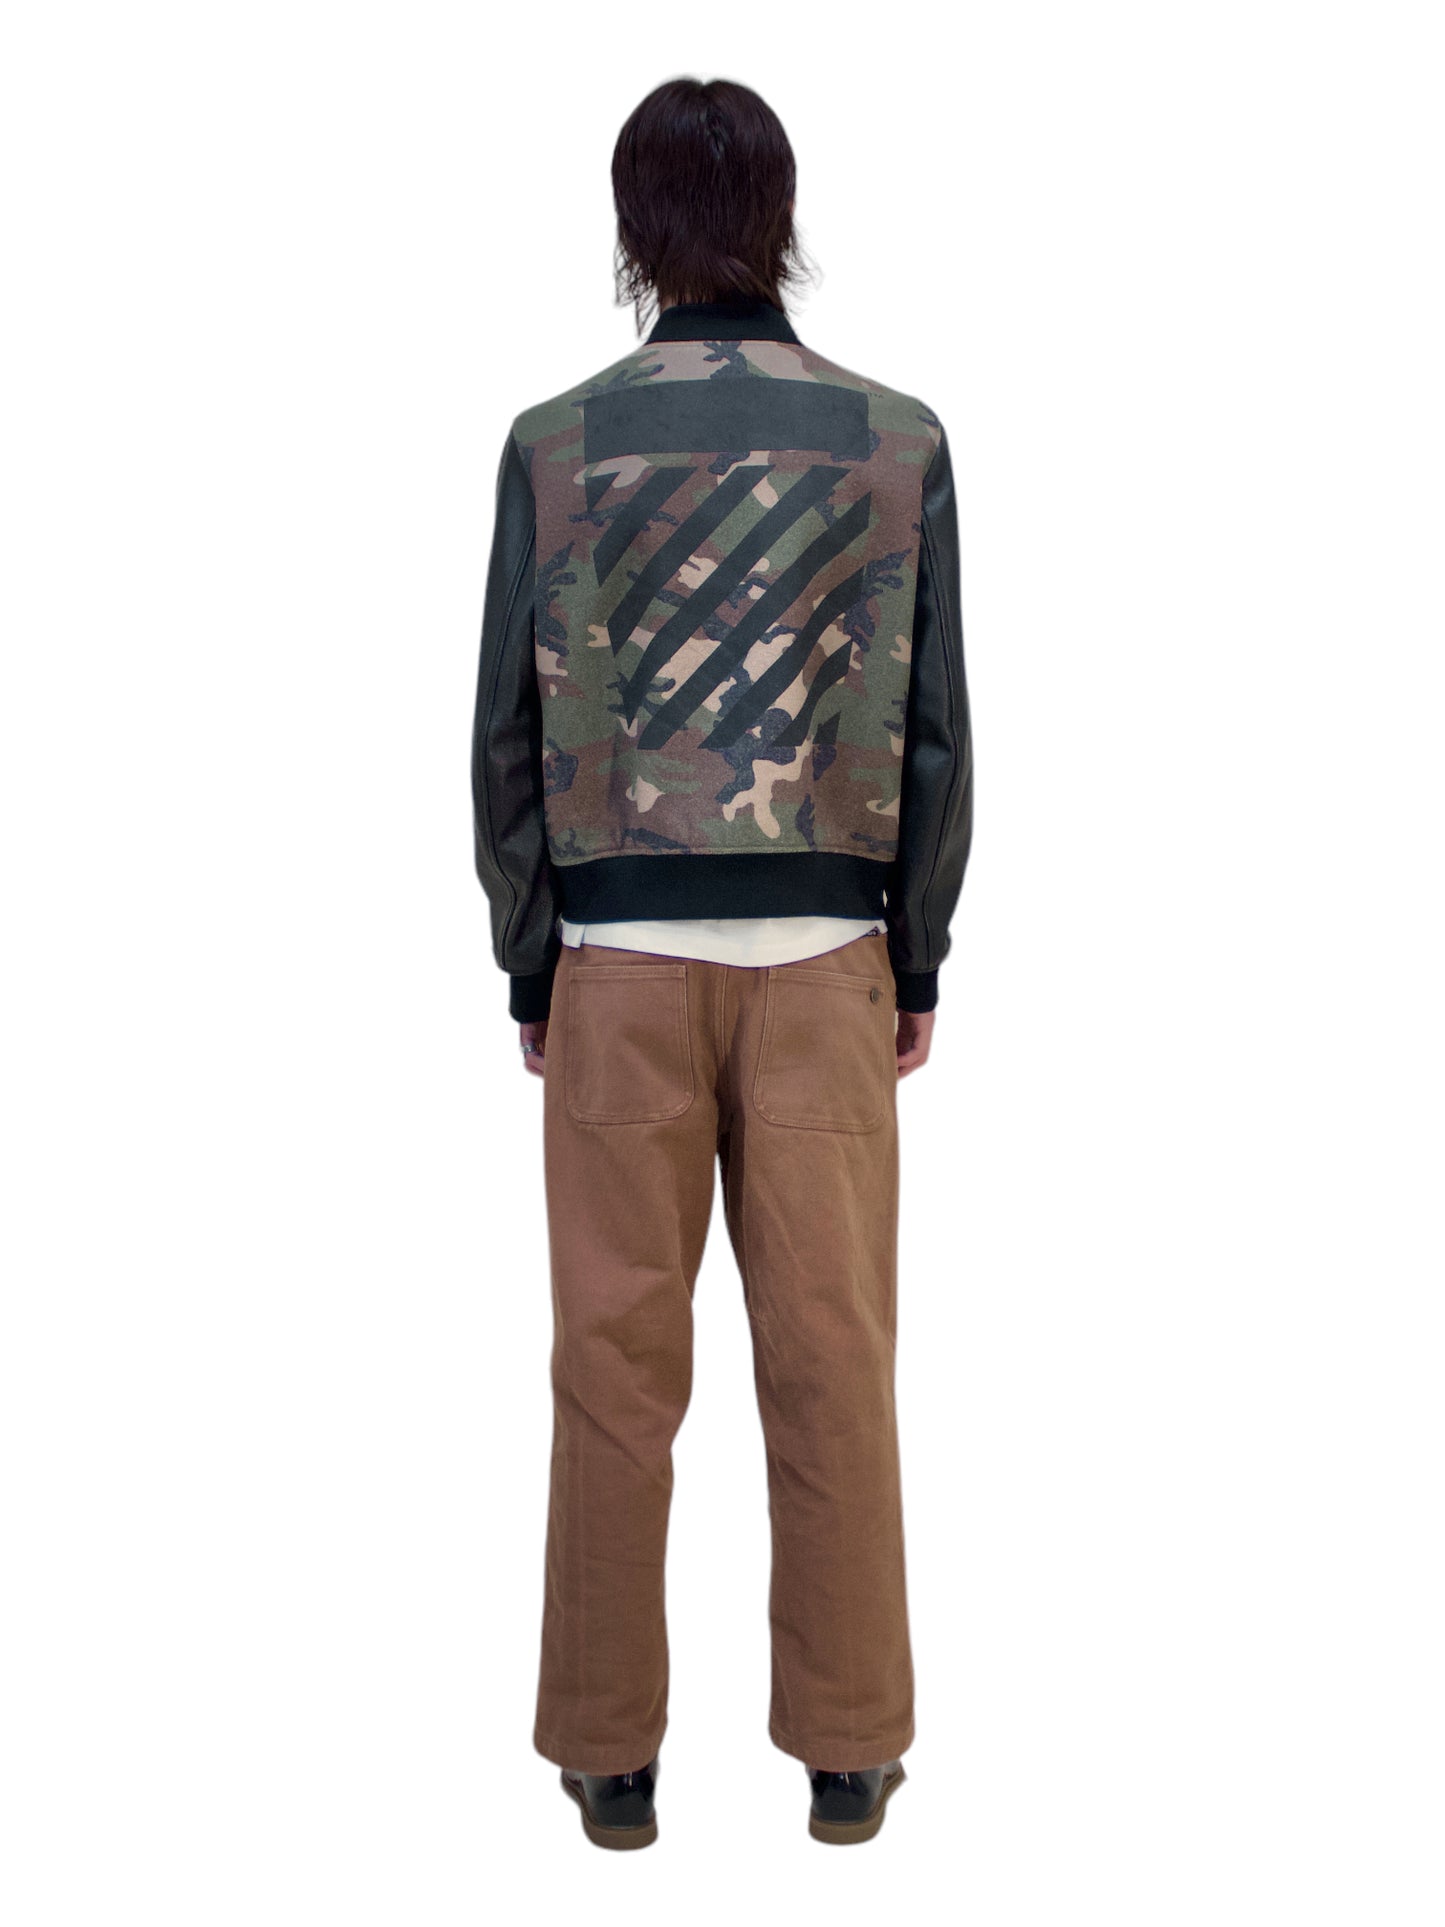 Off-White Green Camo & Black Leather Varsity Jacket - Genuine Design Luxury Consignment for Men. New & Pre-Owned Clothing, Shoes, & Accessories. Calgary, Canada